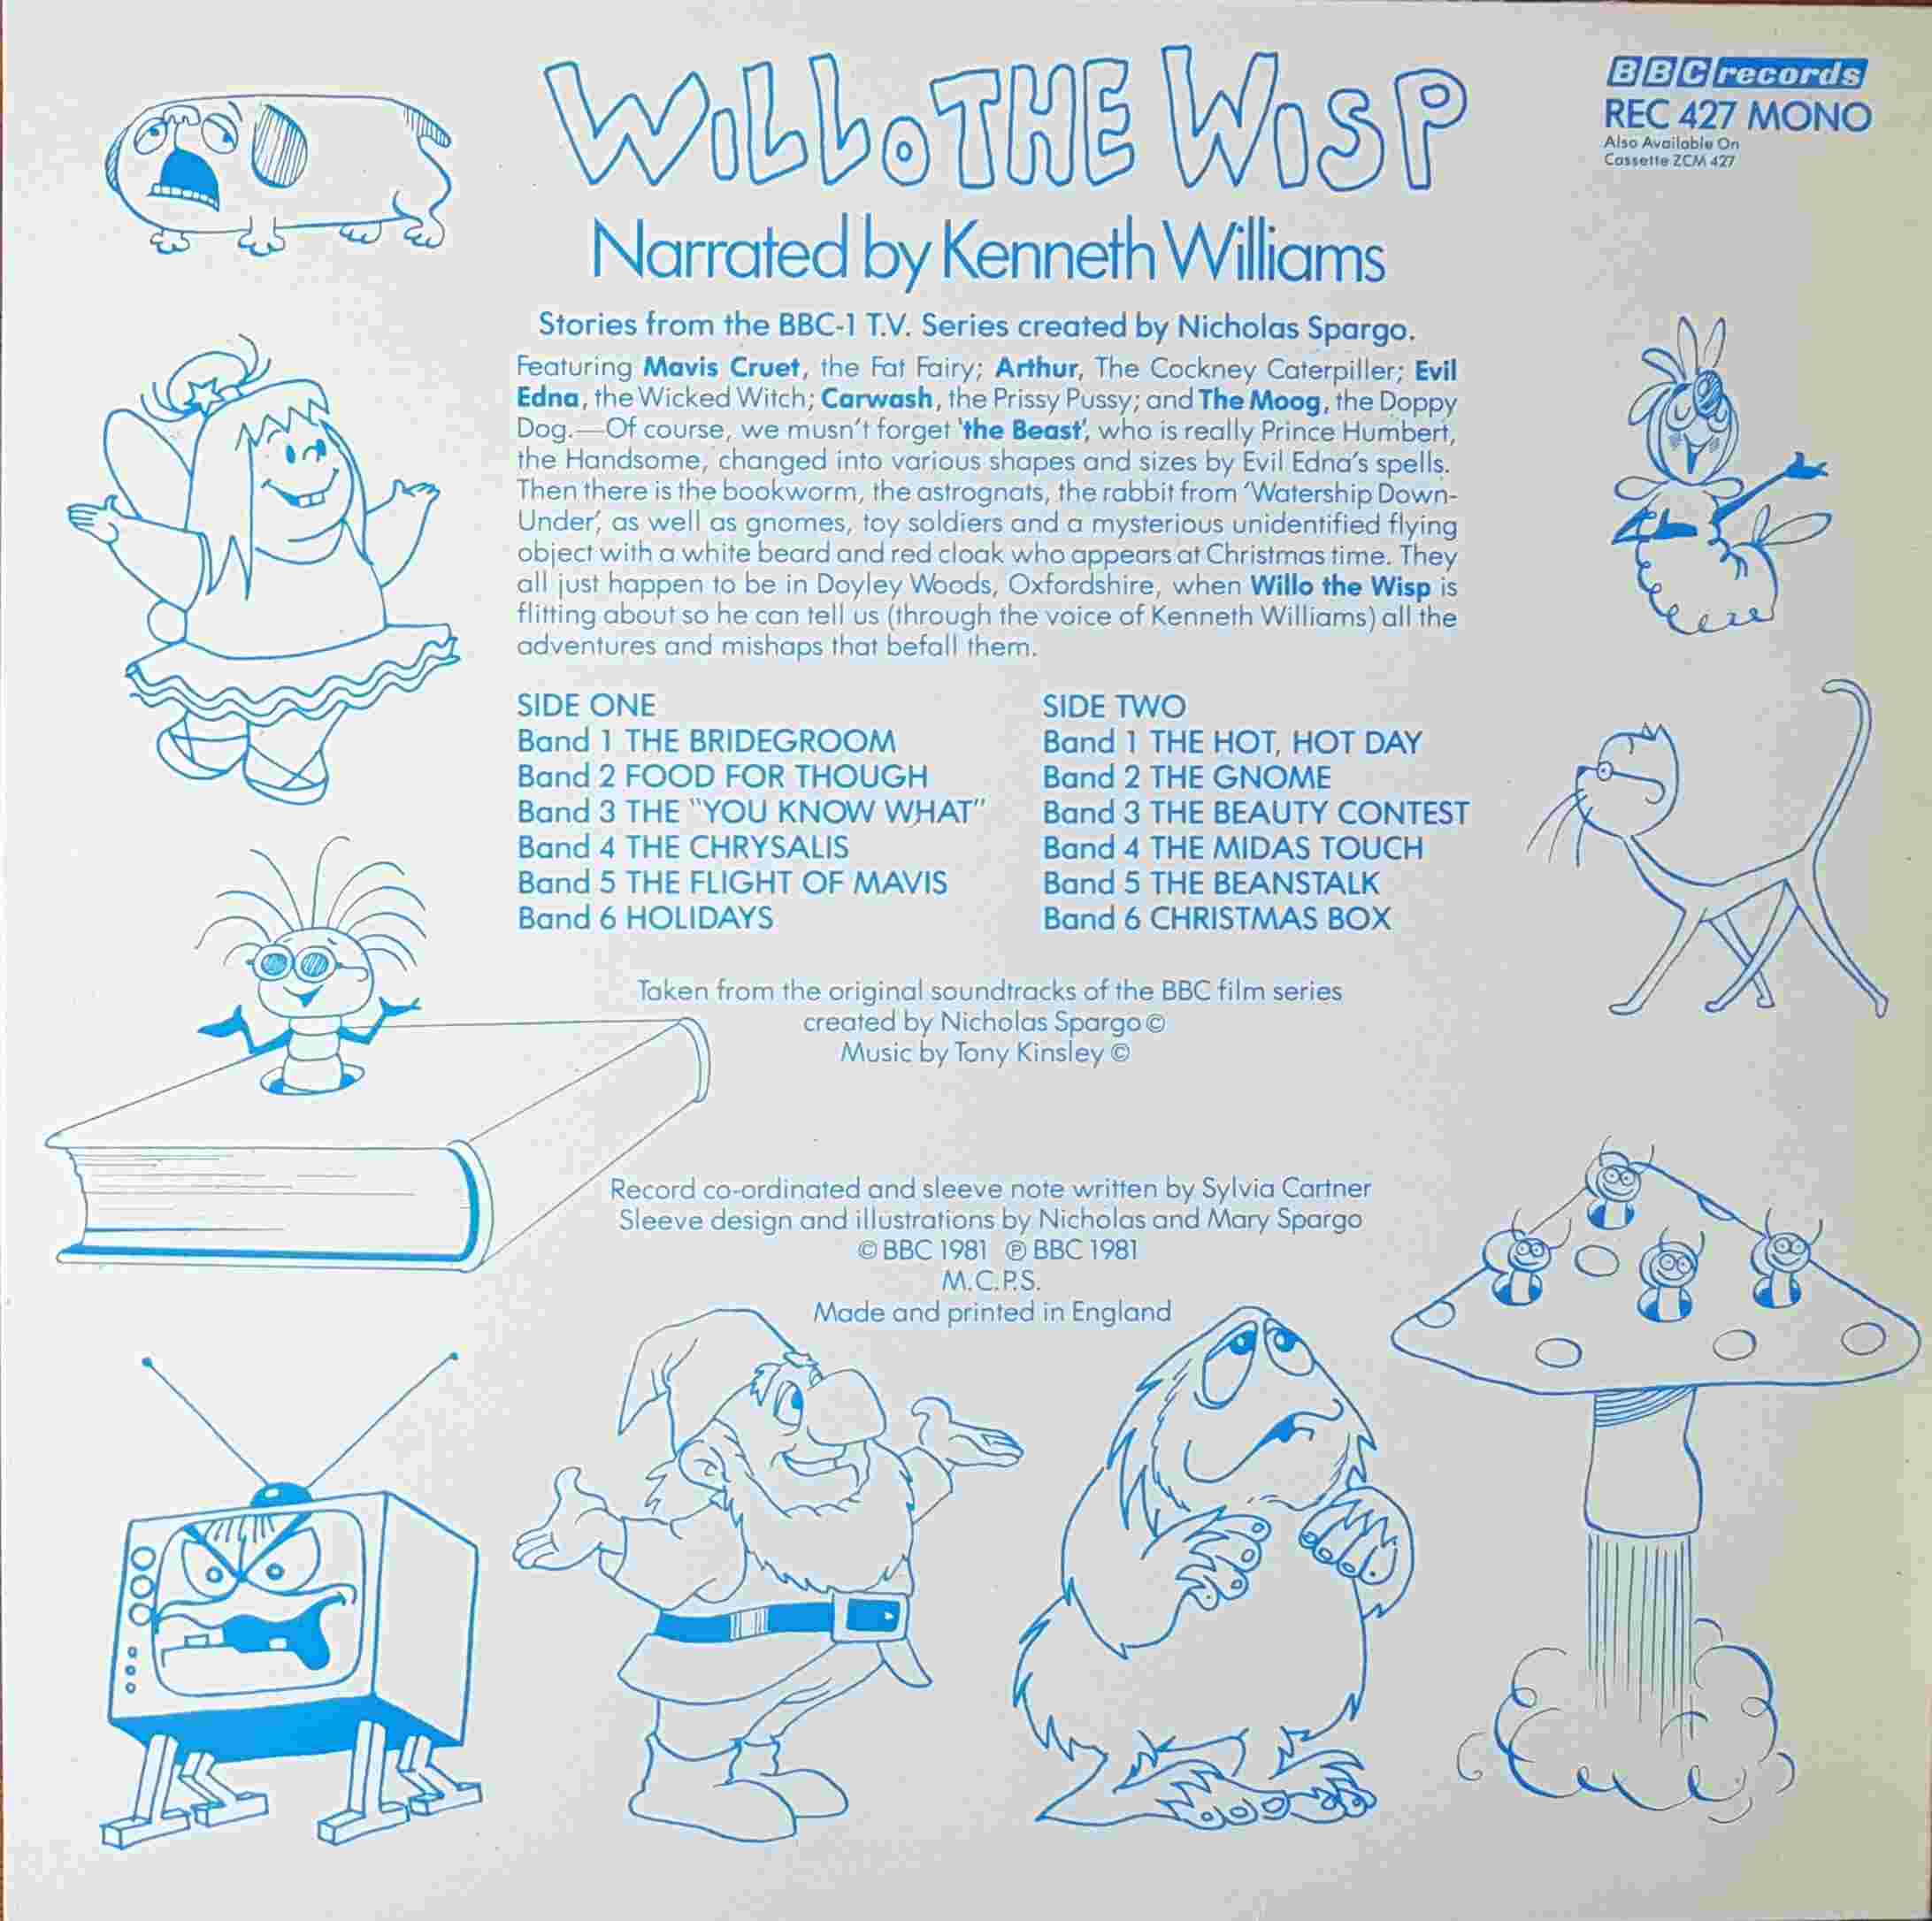 Picture of REC 427 Willo the wisp by artist Nicholas Spargo / Kenneth Williams from the BBC records and Tapes library